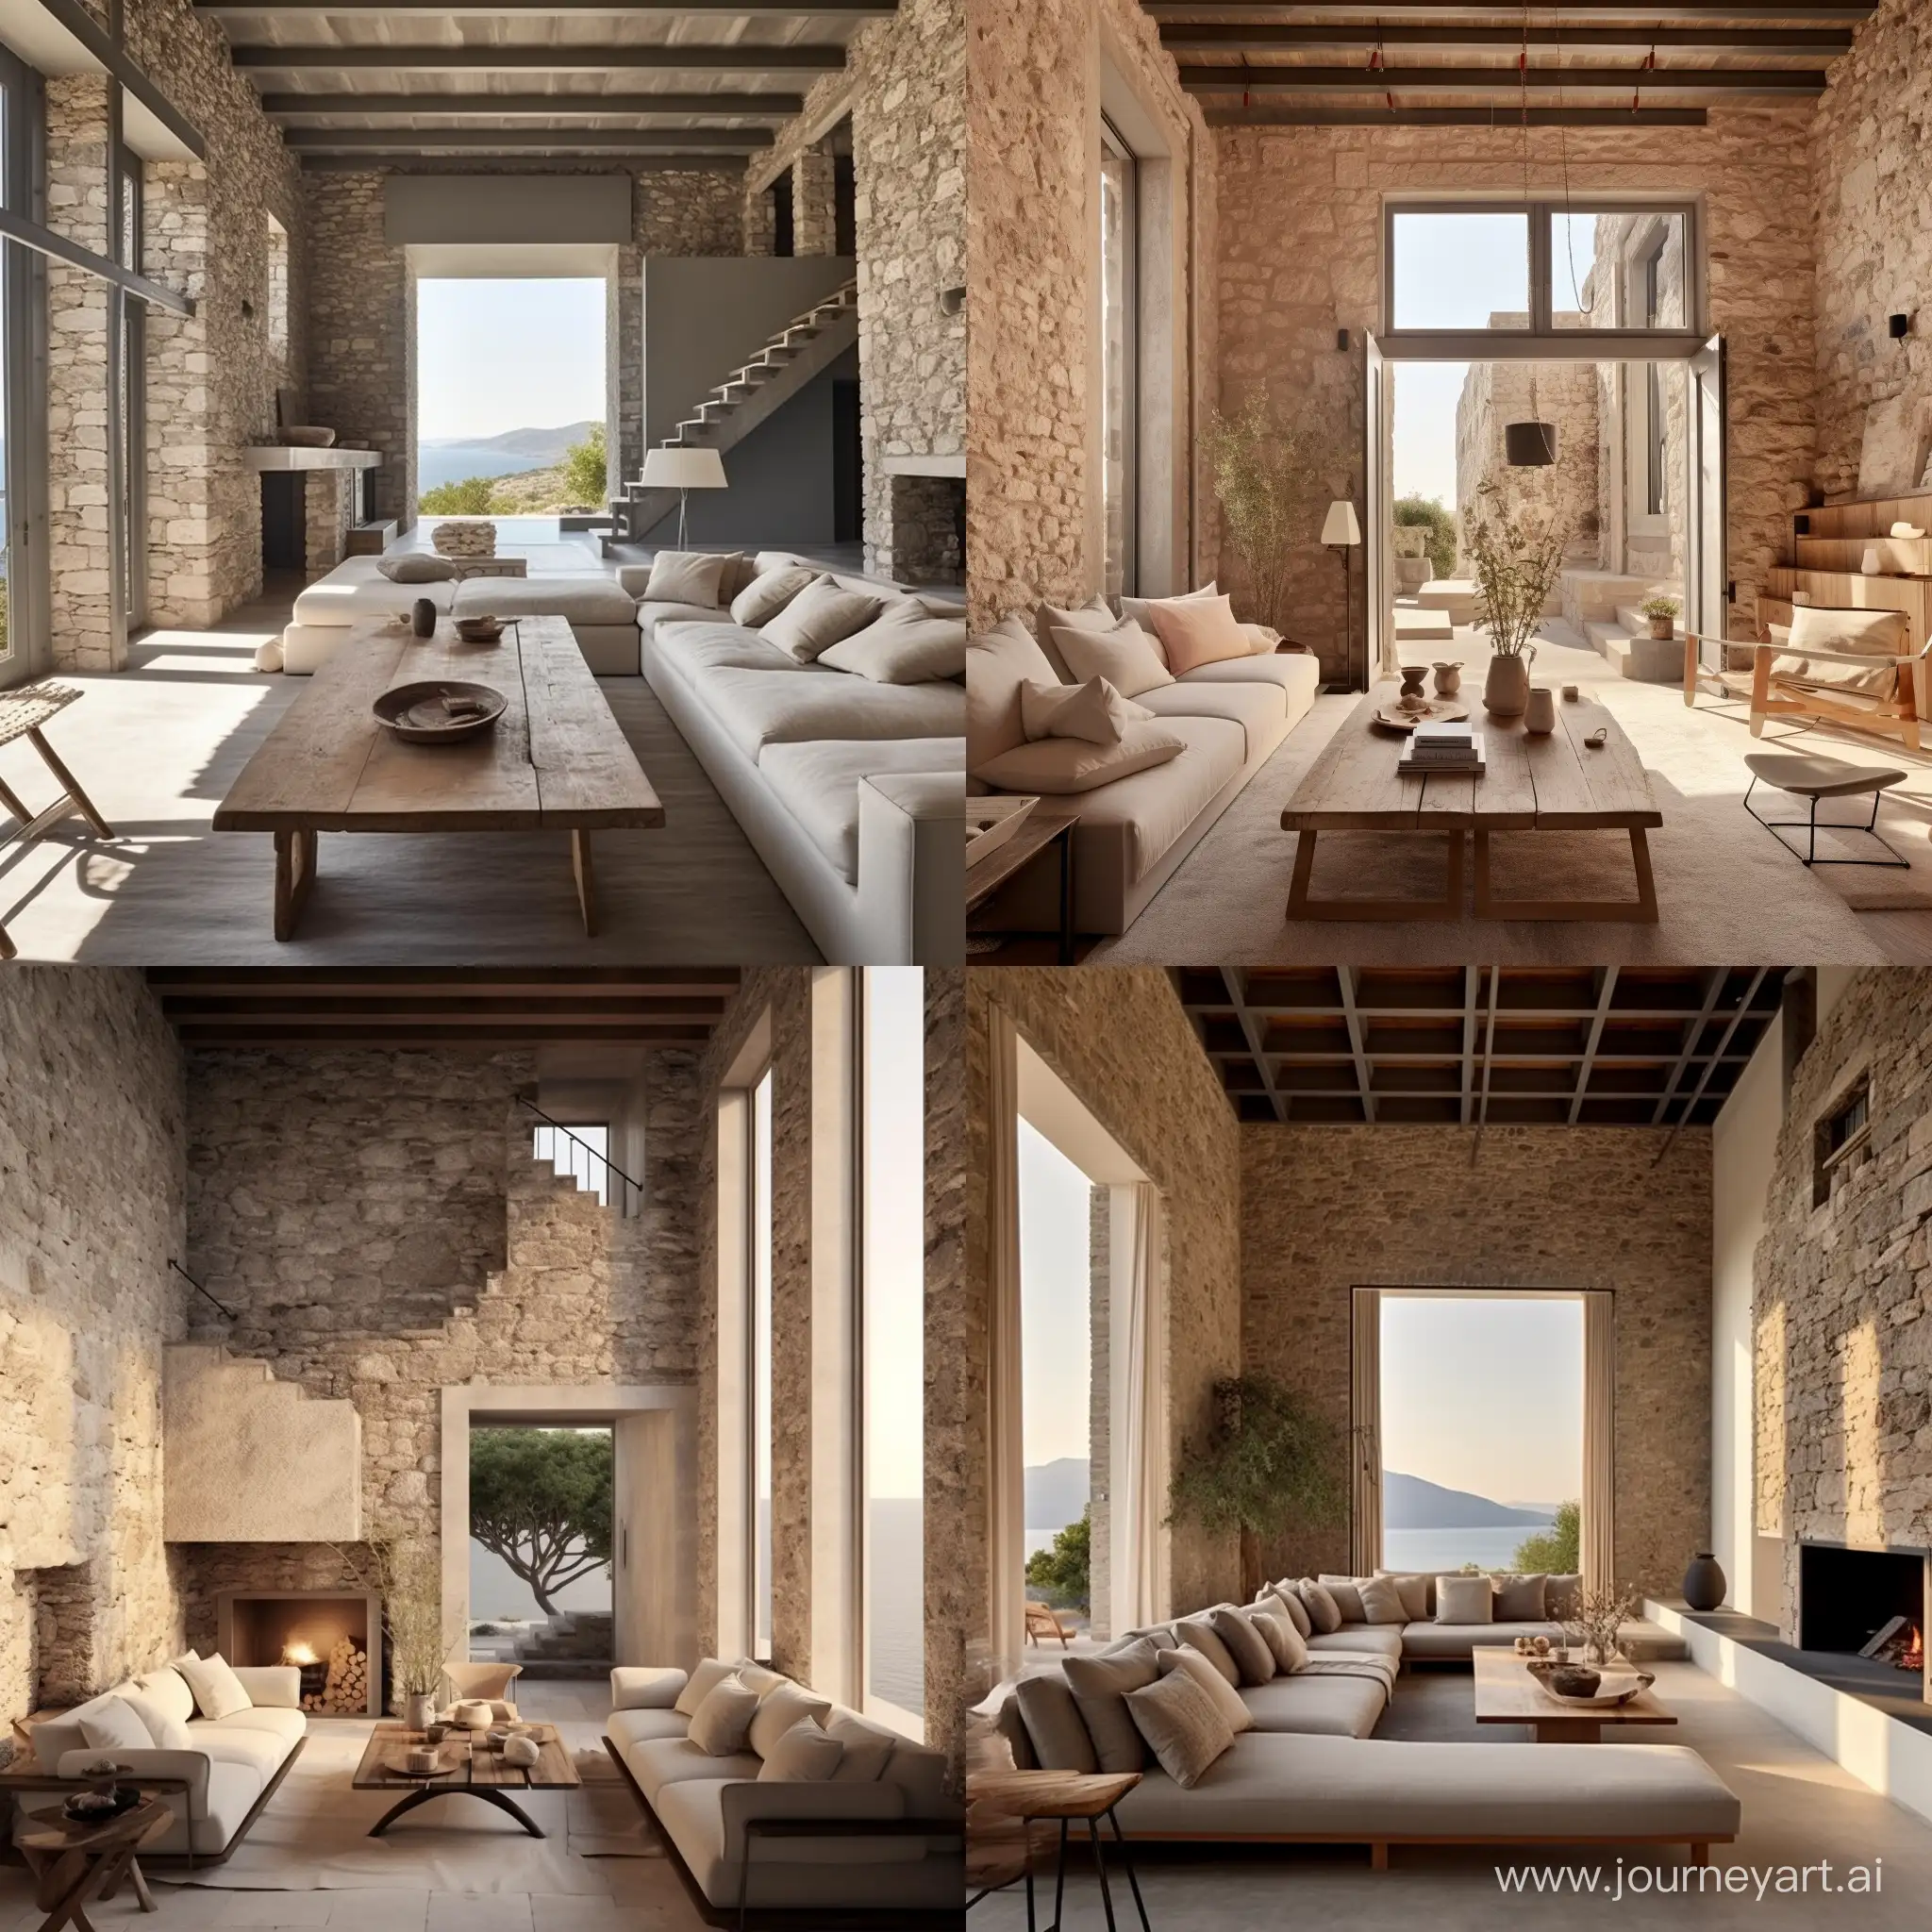 A tall ceiling stone house located in Aegina Greece